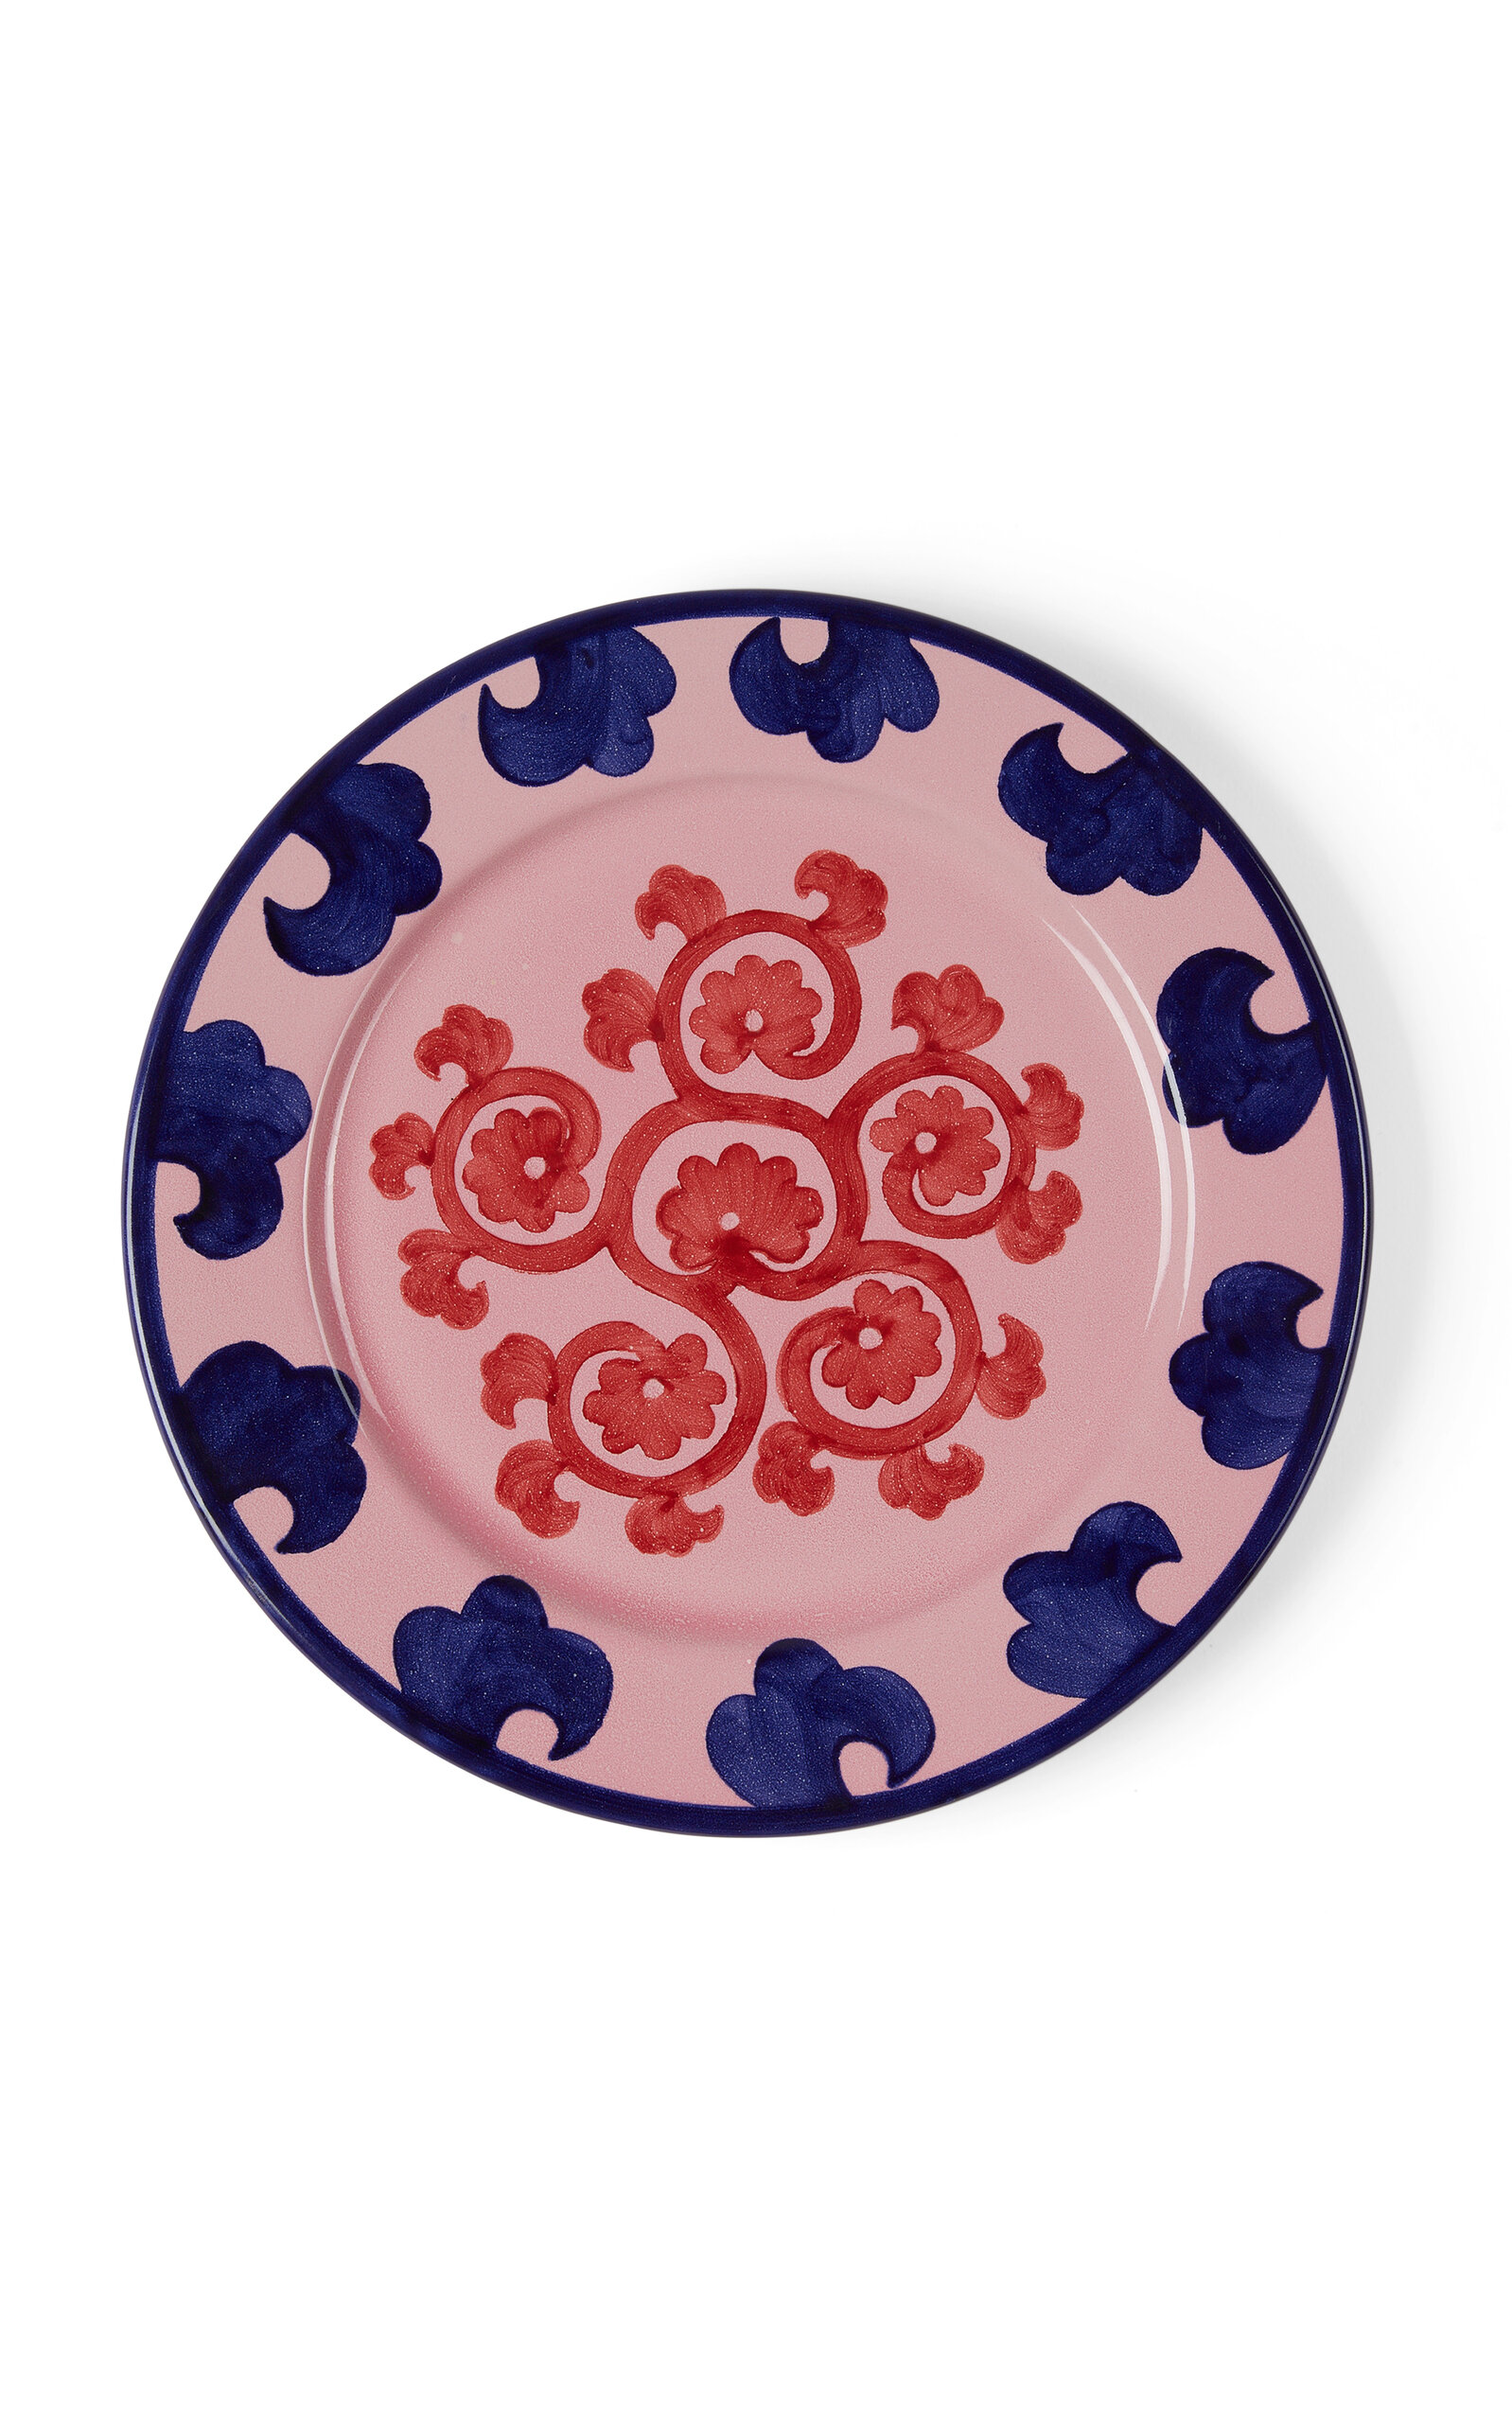 Emporio Sirenuse Flower Charger Plate In Pink